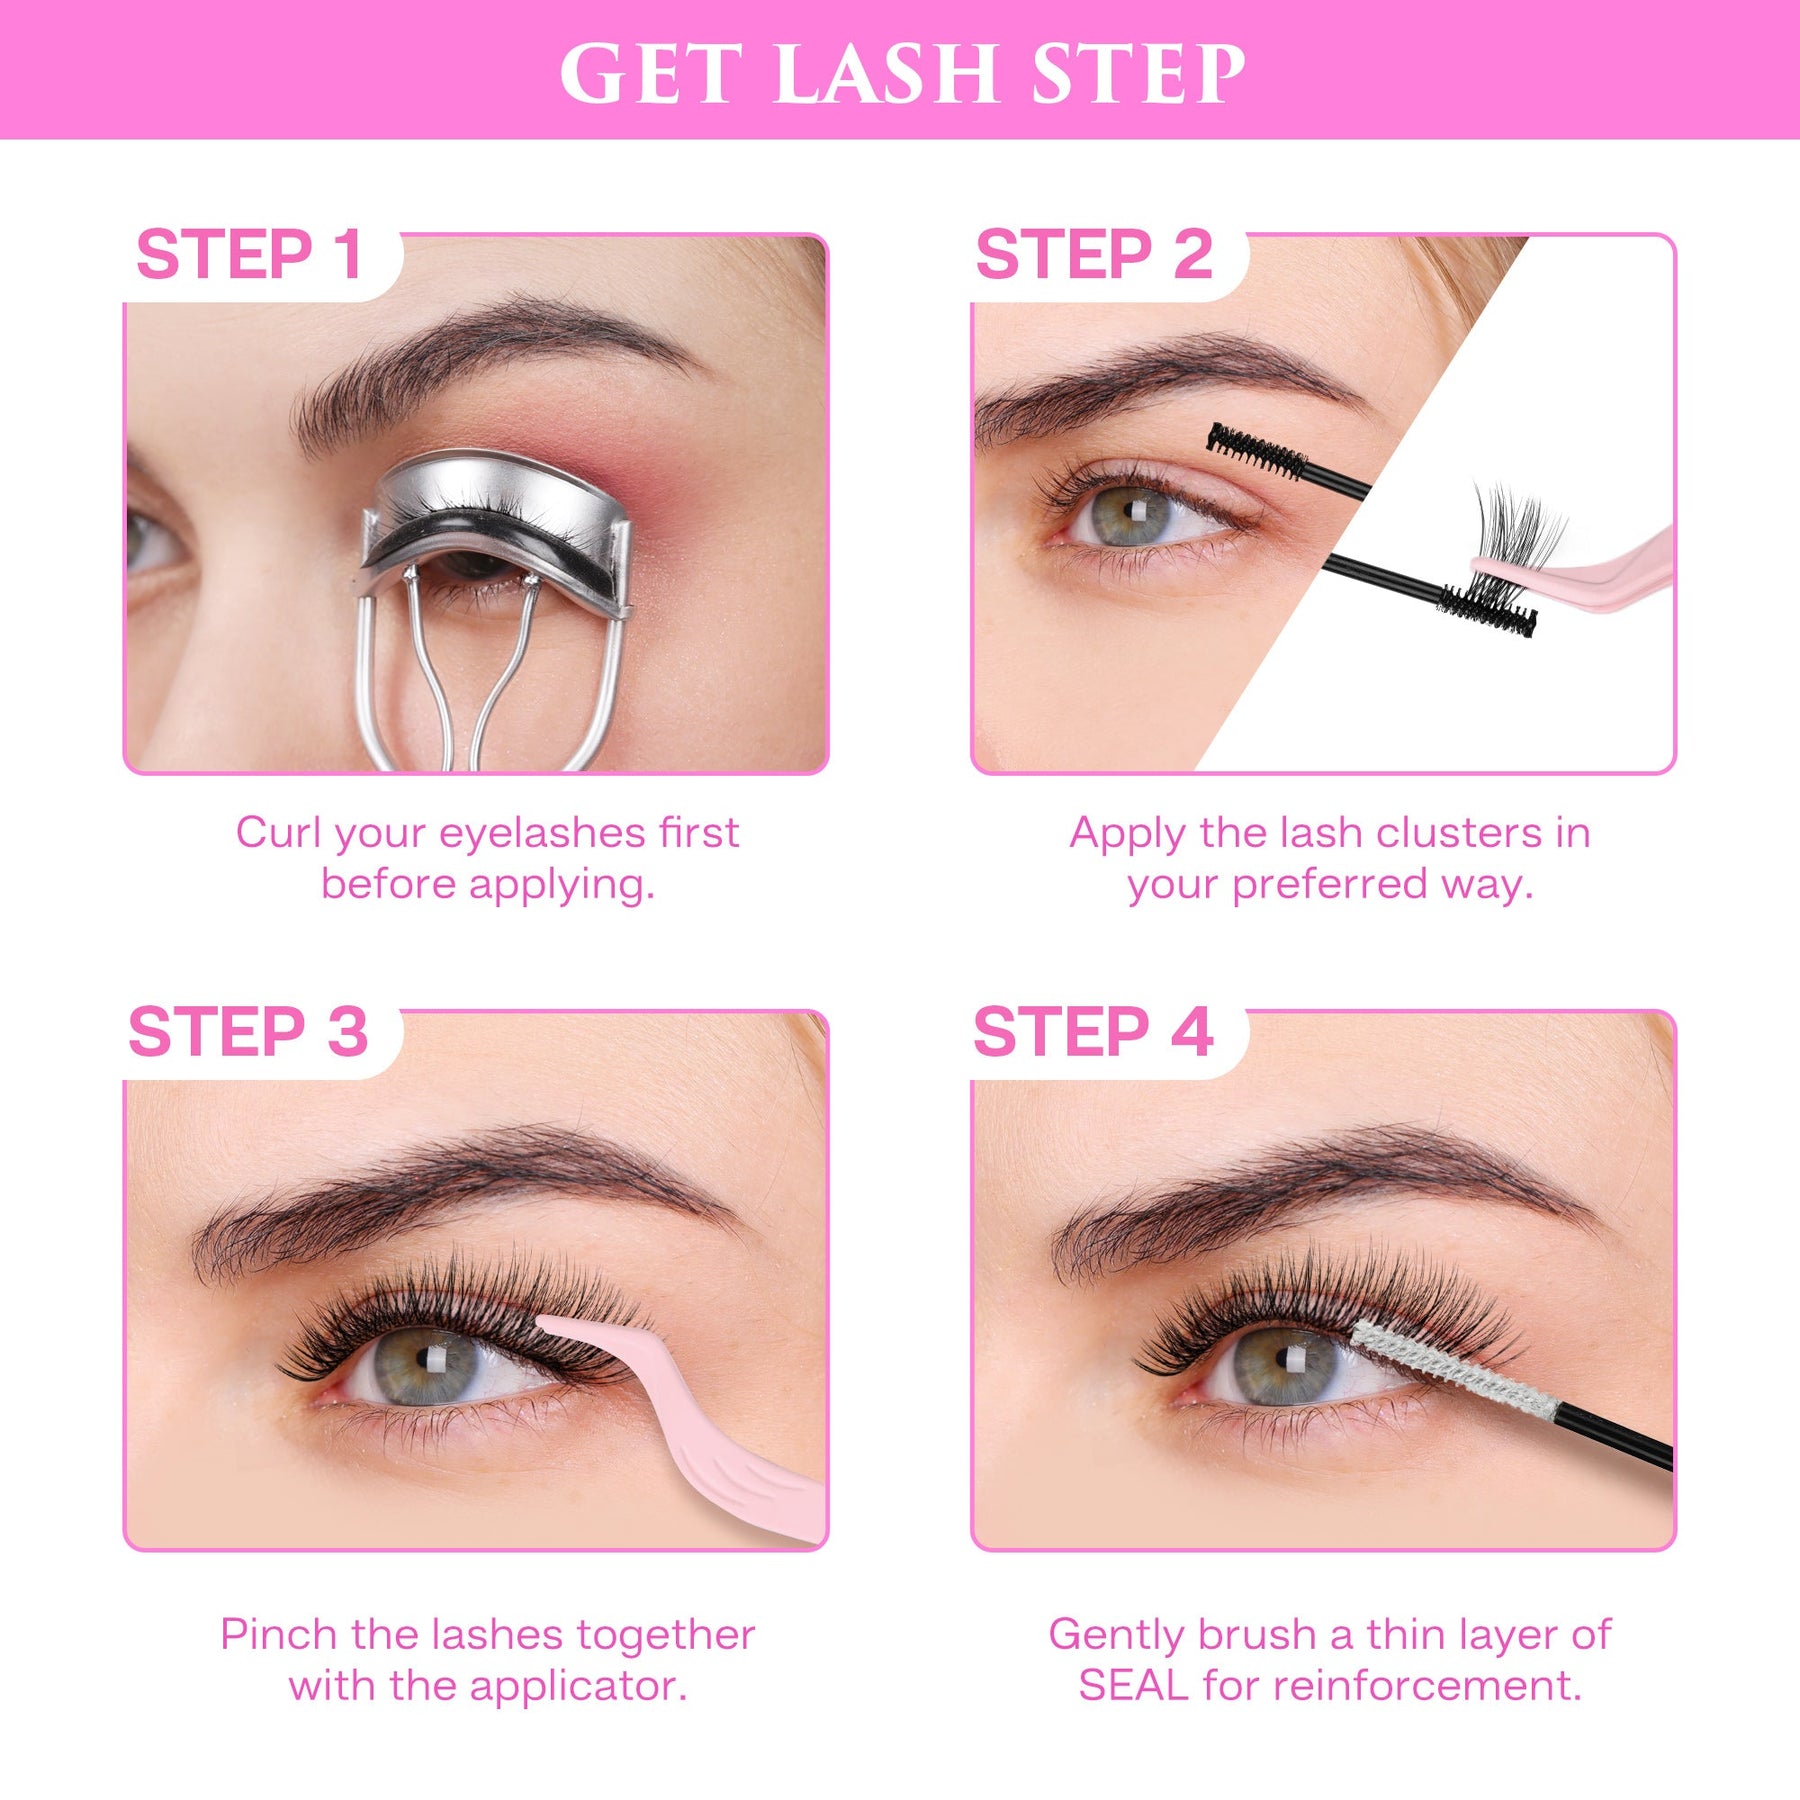 DIY Cluster Lashes Look Exactly Like Extensions - Starter Kit, Medium